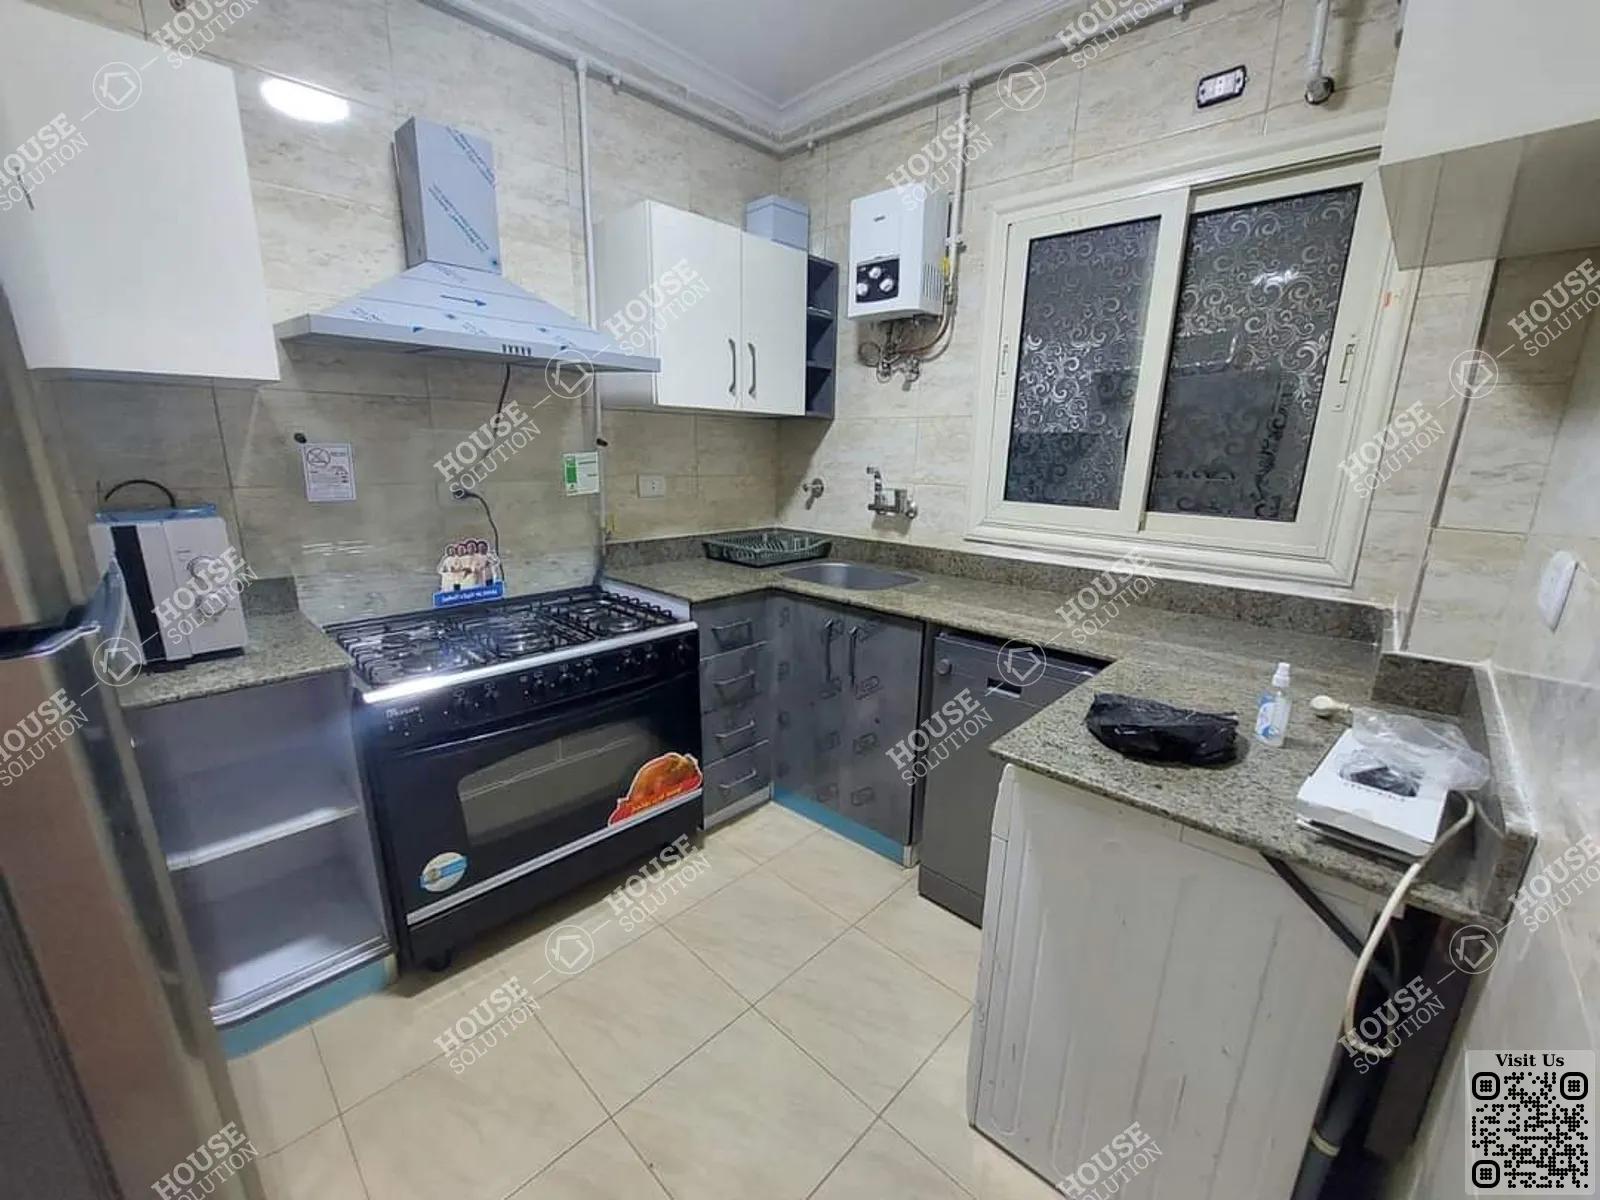 KITCHEN  @ Apartments For Rent In Maadi Maadi Degla Area: 100 m² consists of 2 Bedrooms 2 Bathrooms Modern furnished 5 stars #5375-1